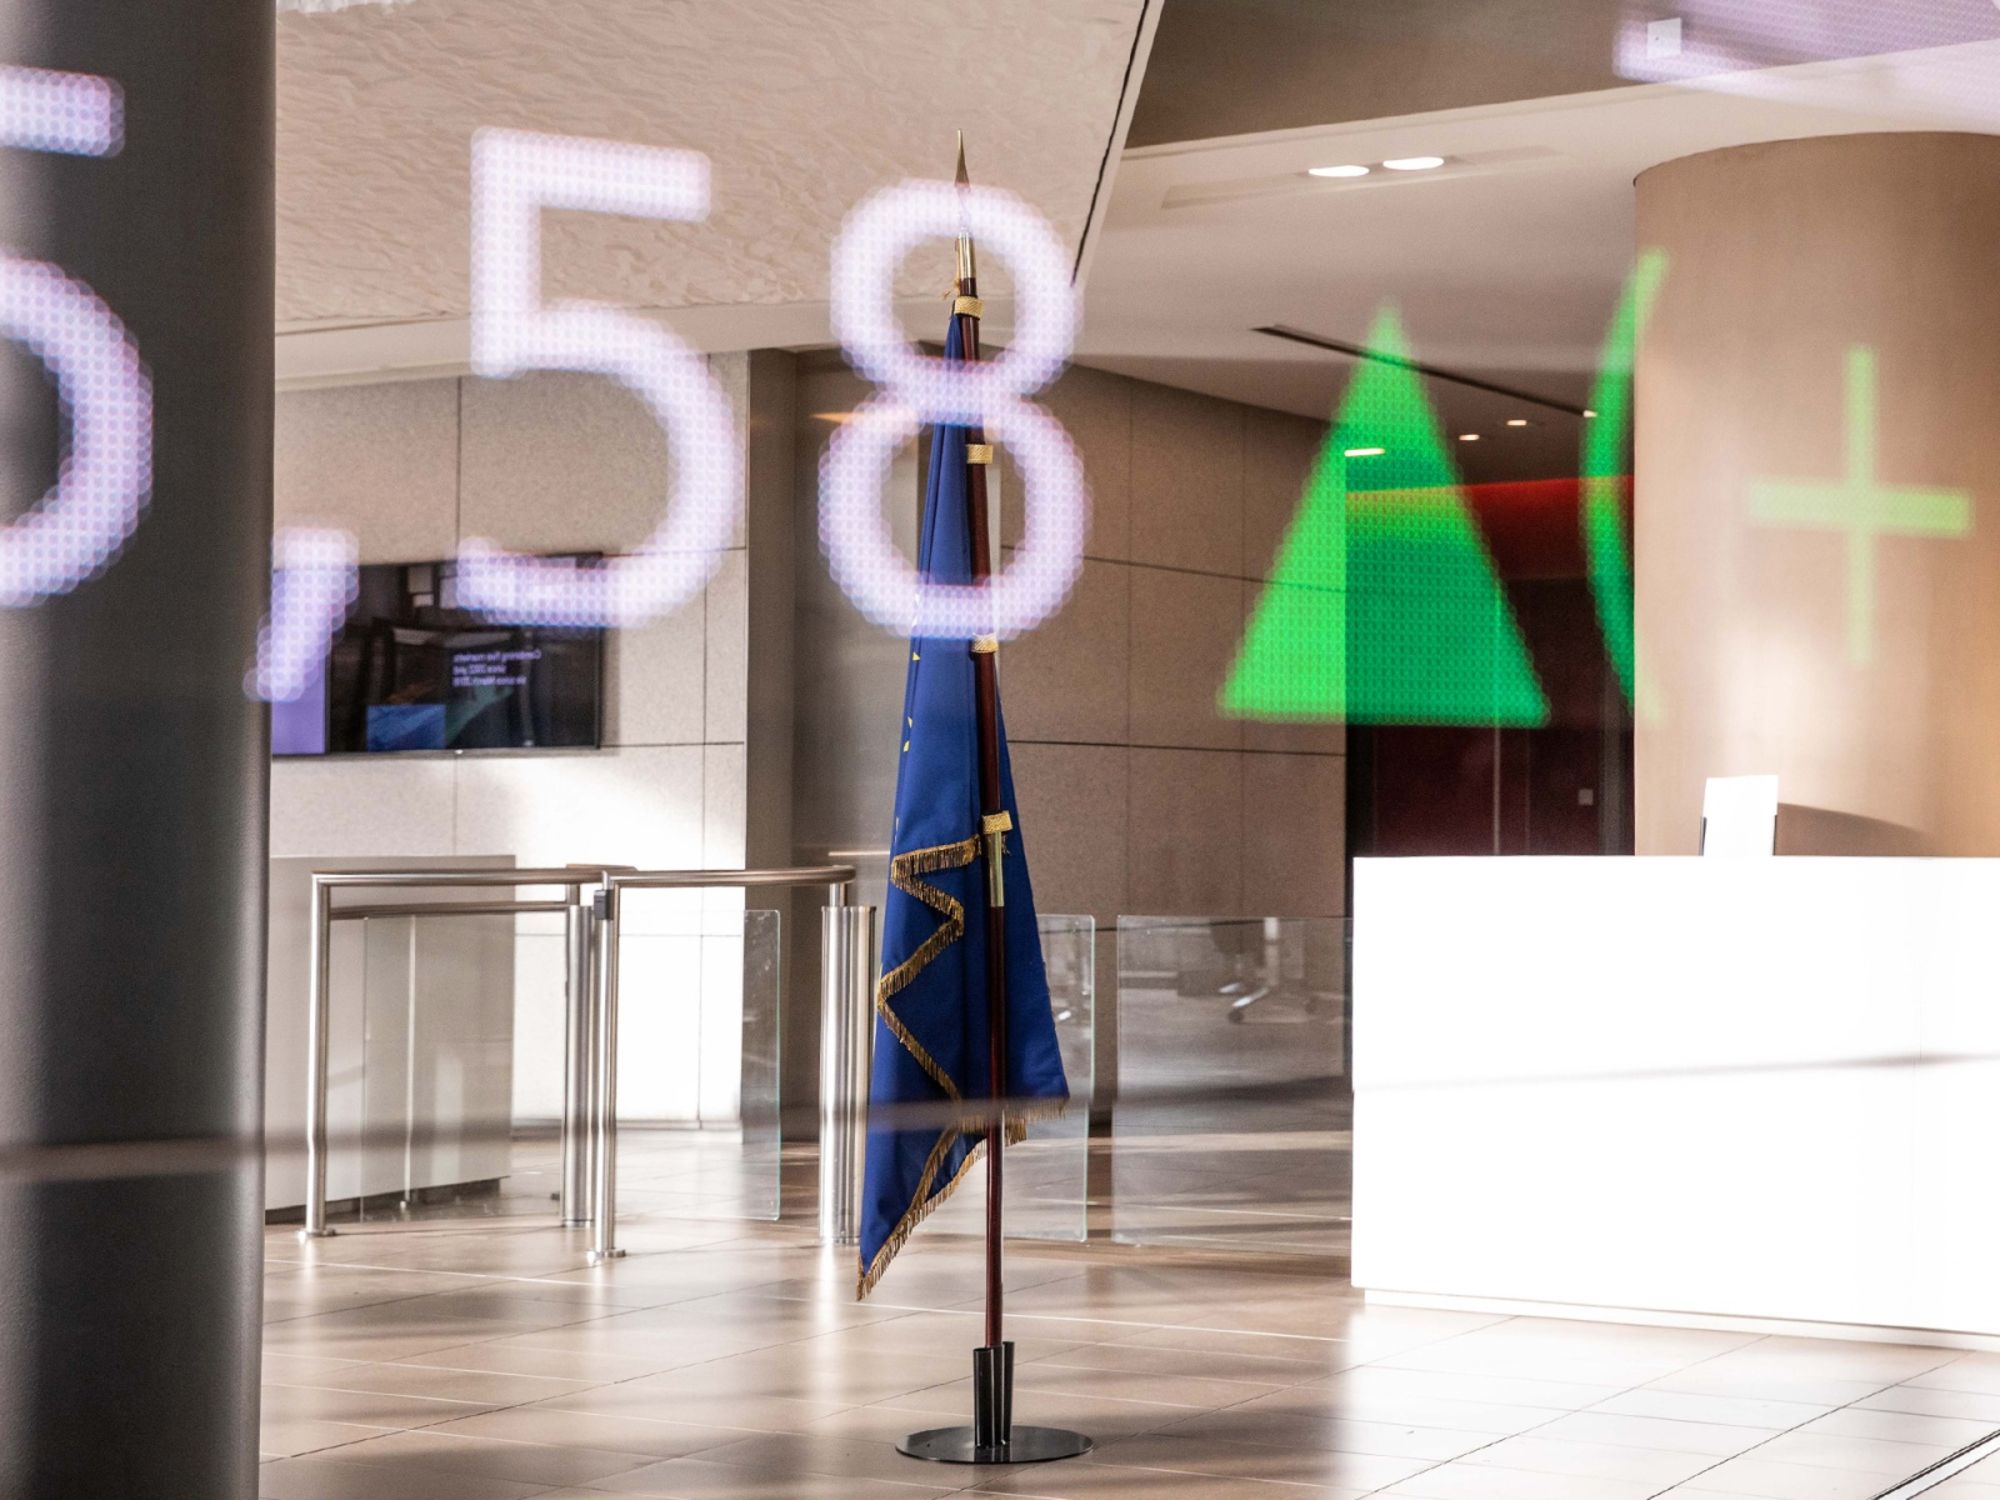 Stock information is projected on a glass panel as a European Union (EU) flag hangs in the lobby of the Euronext Paris stock exchange in La Defense business district of Paris, France, on Wednesday, Jan. 16, 2019. European investors shook off the rejection of U.K. Prime Minister Theresa Mays Brexit deal in parliament ahead of a confidence vote, opening higher after mixed markets in Asia, and gains in the U.S. Photographer: Bloomberg/Bloomberg